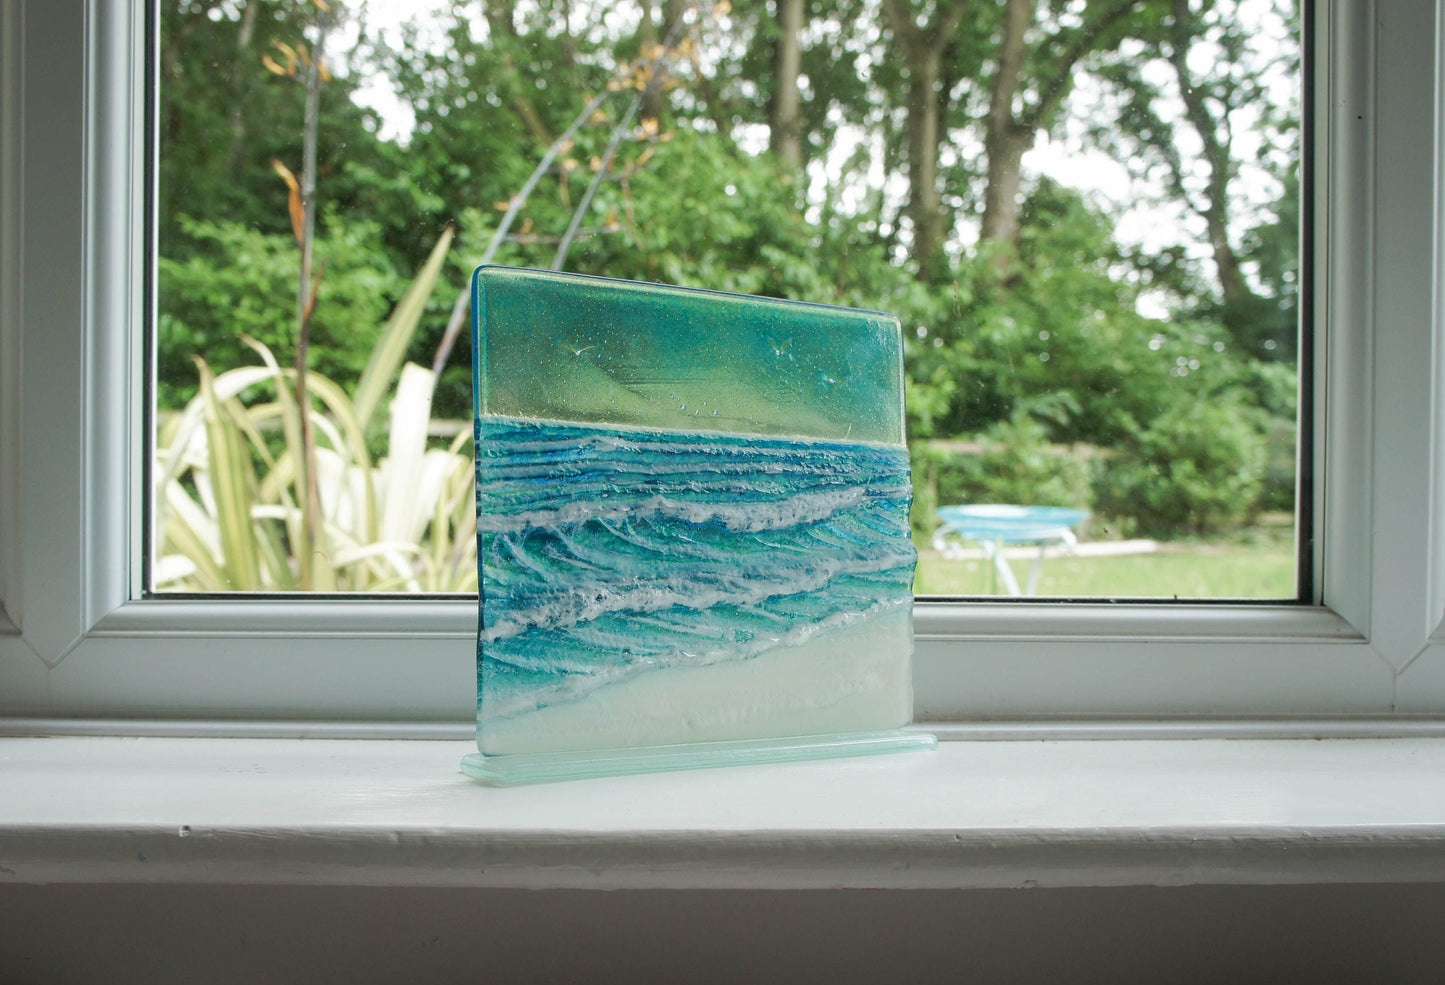 Wave Panel - Model 3 - 22x20cm(8 1/2x7 3/4") on a foot